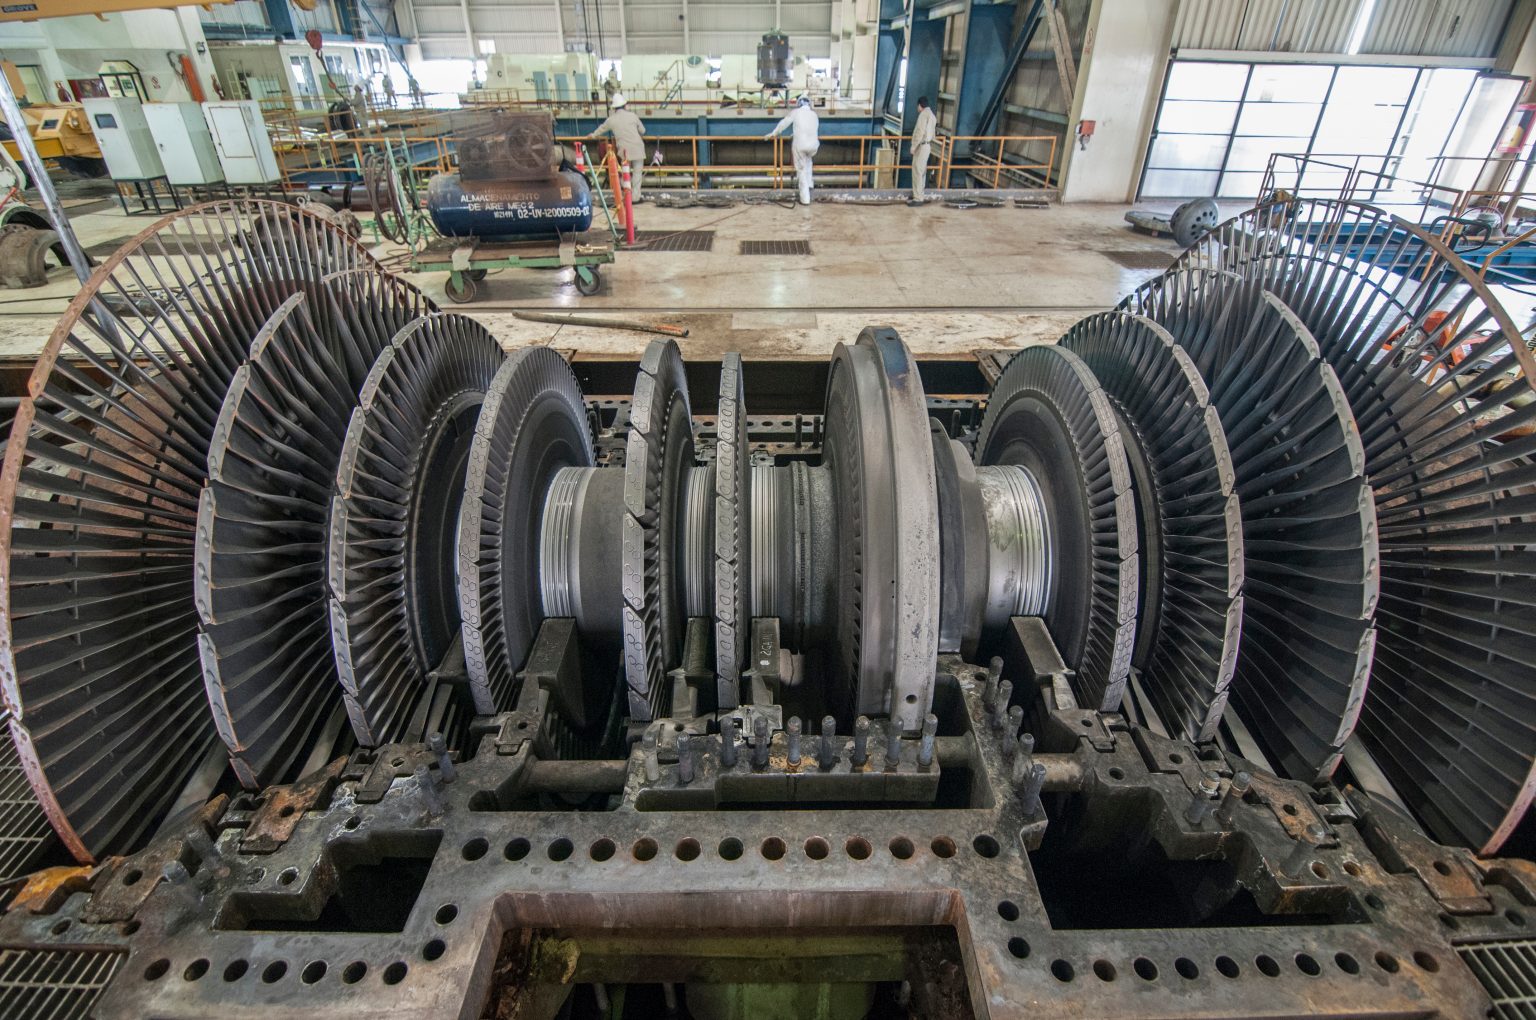 Turbines powered by steam фото 16